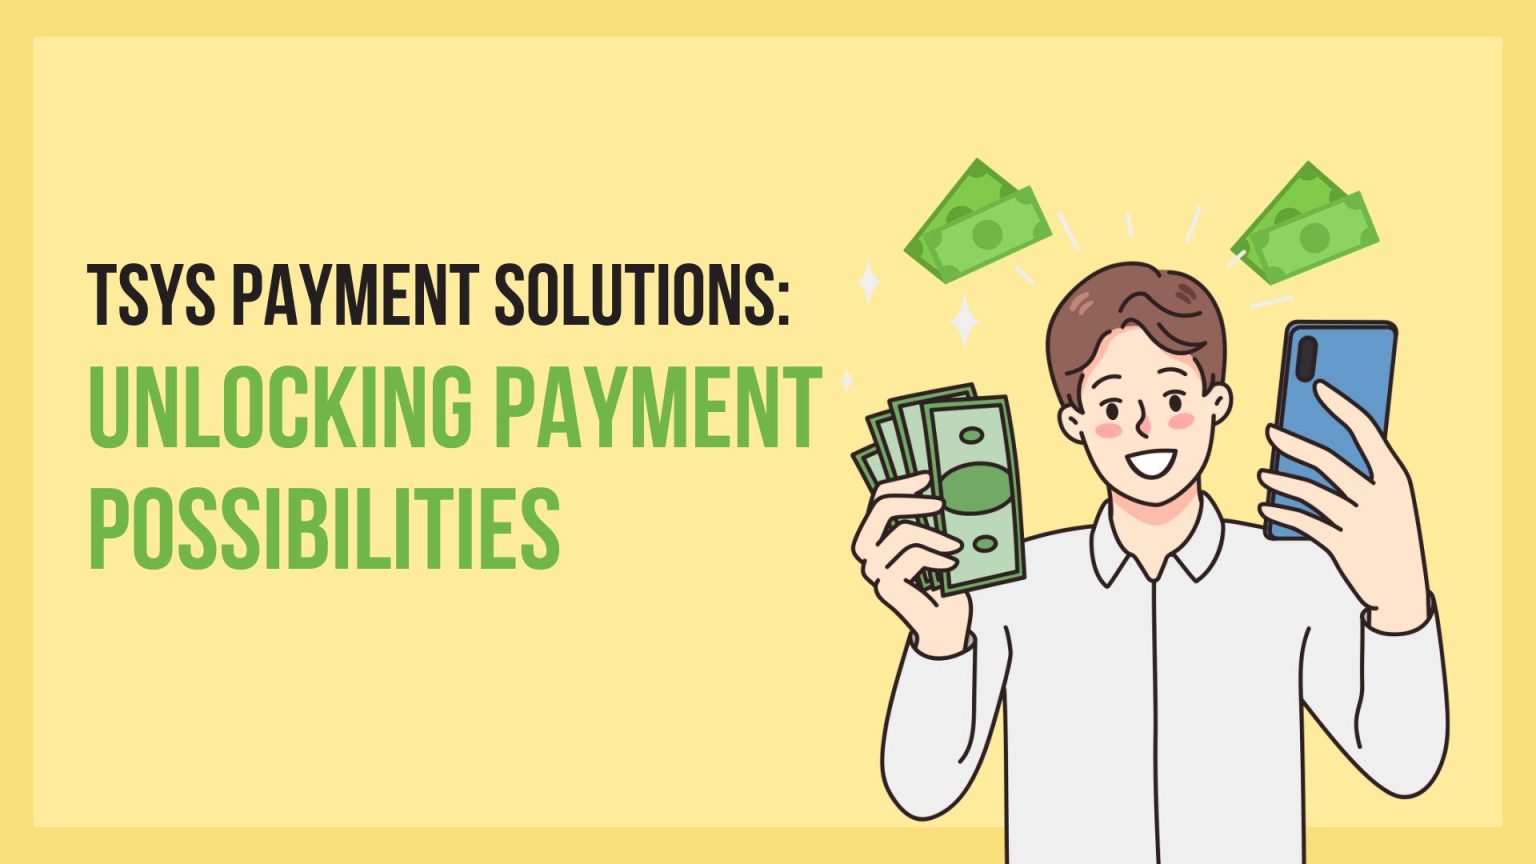 TSYS Payment Solutions: Unlocking Payment Possibilities